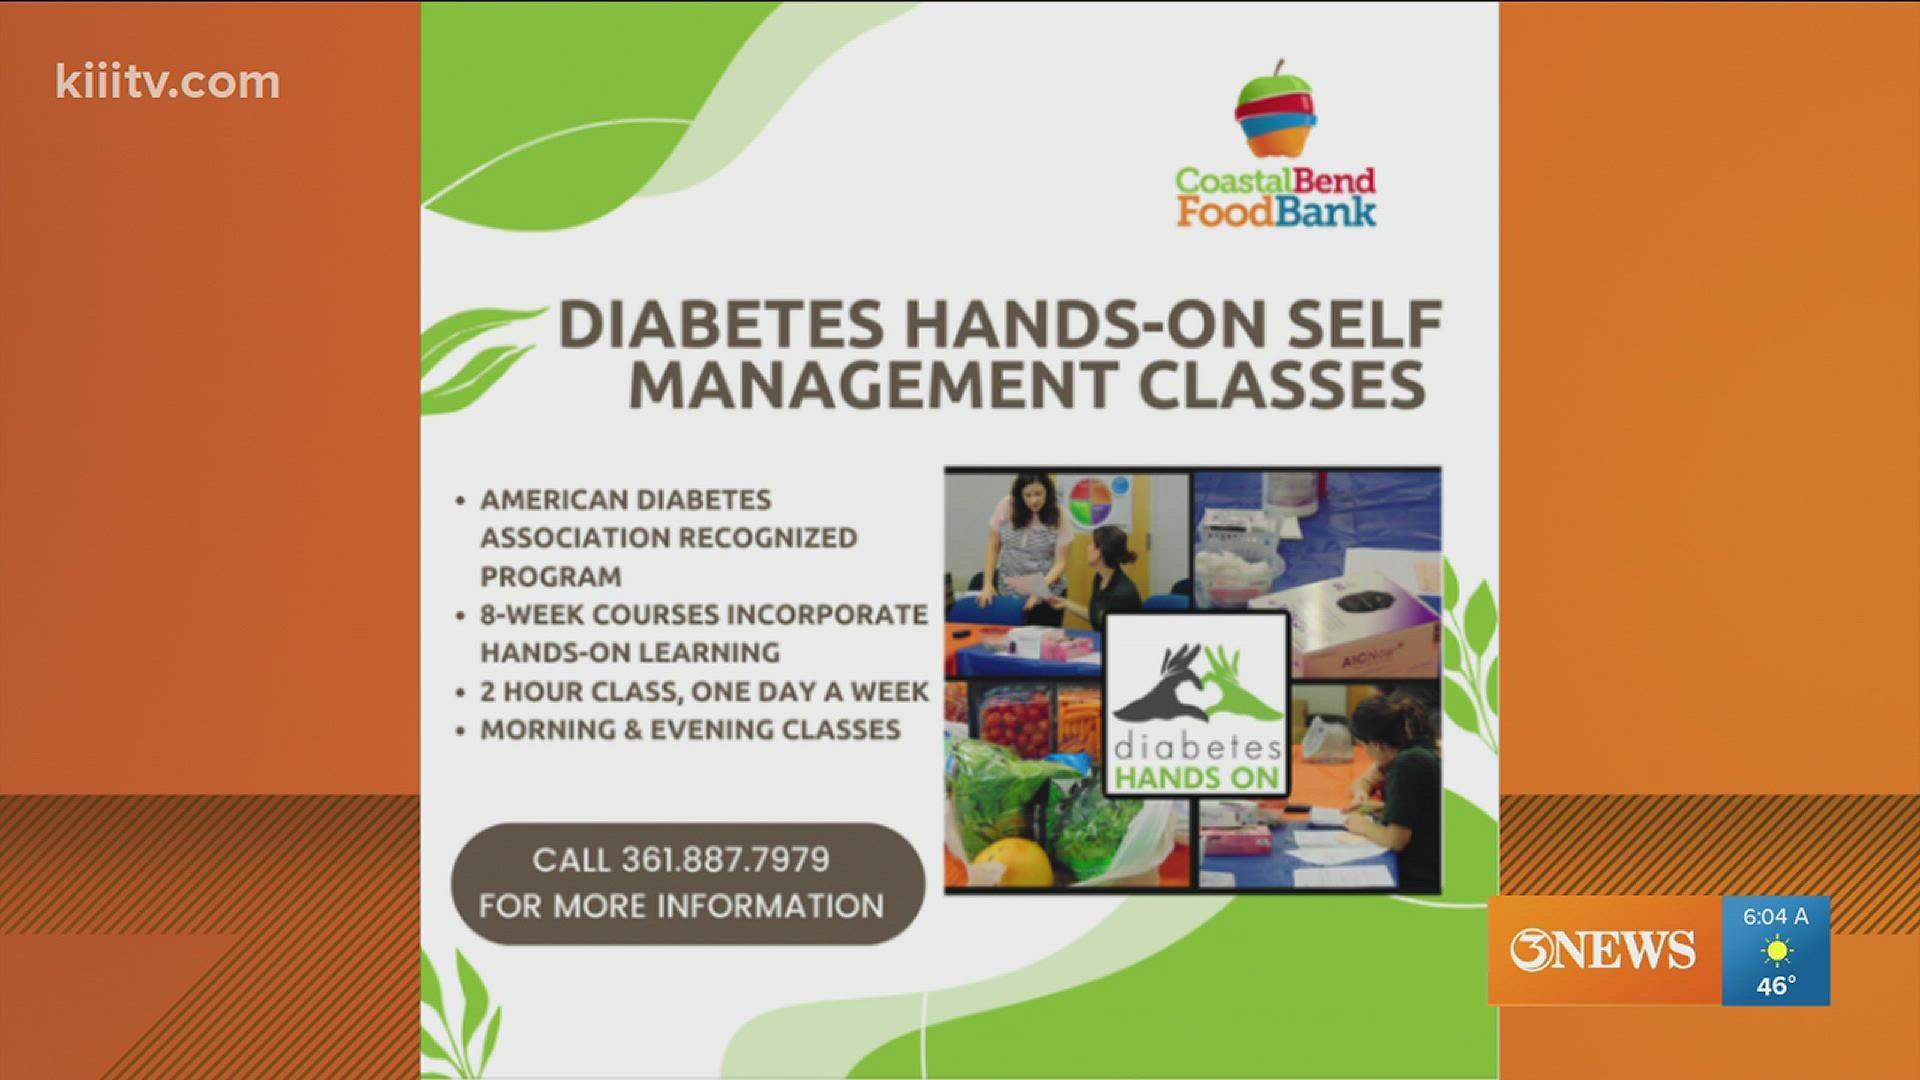 It's an 8-week course on how to manage and thrive with diabetes. The classes teach medication management, exercise, and nutrition.